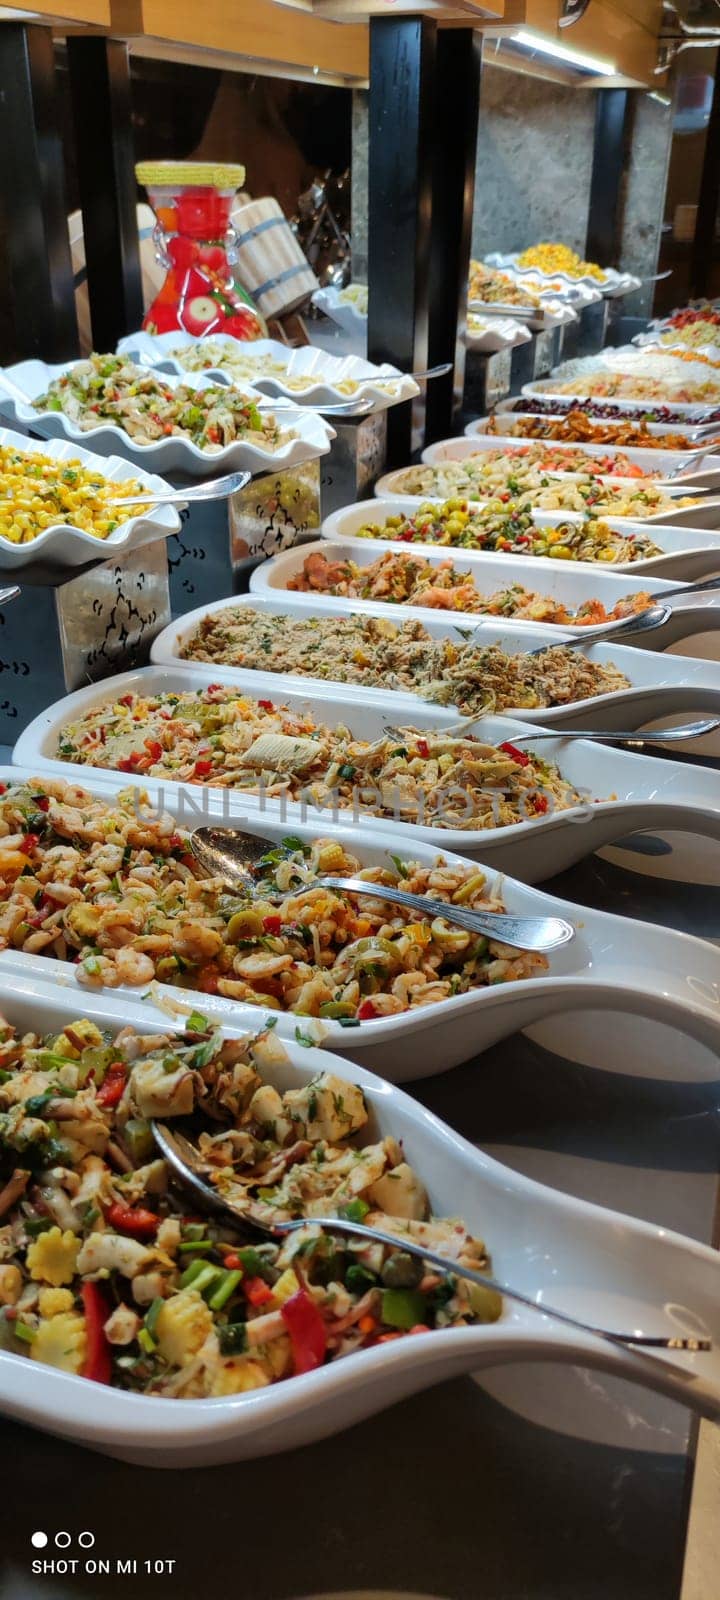 Salads for every taste in one of the Turkish hotel restaurants